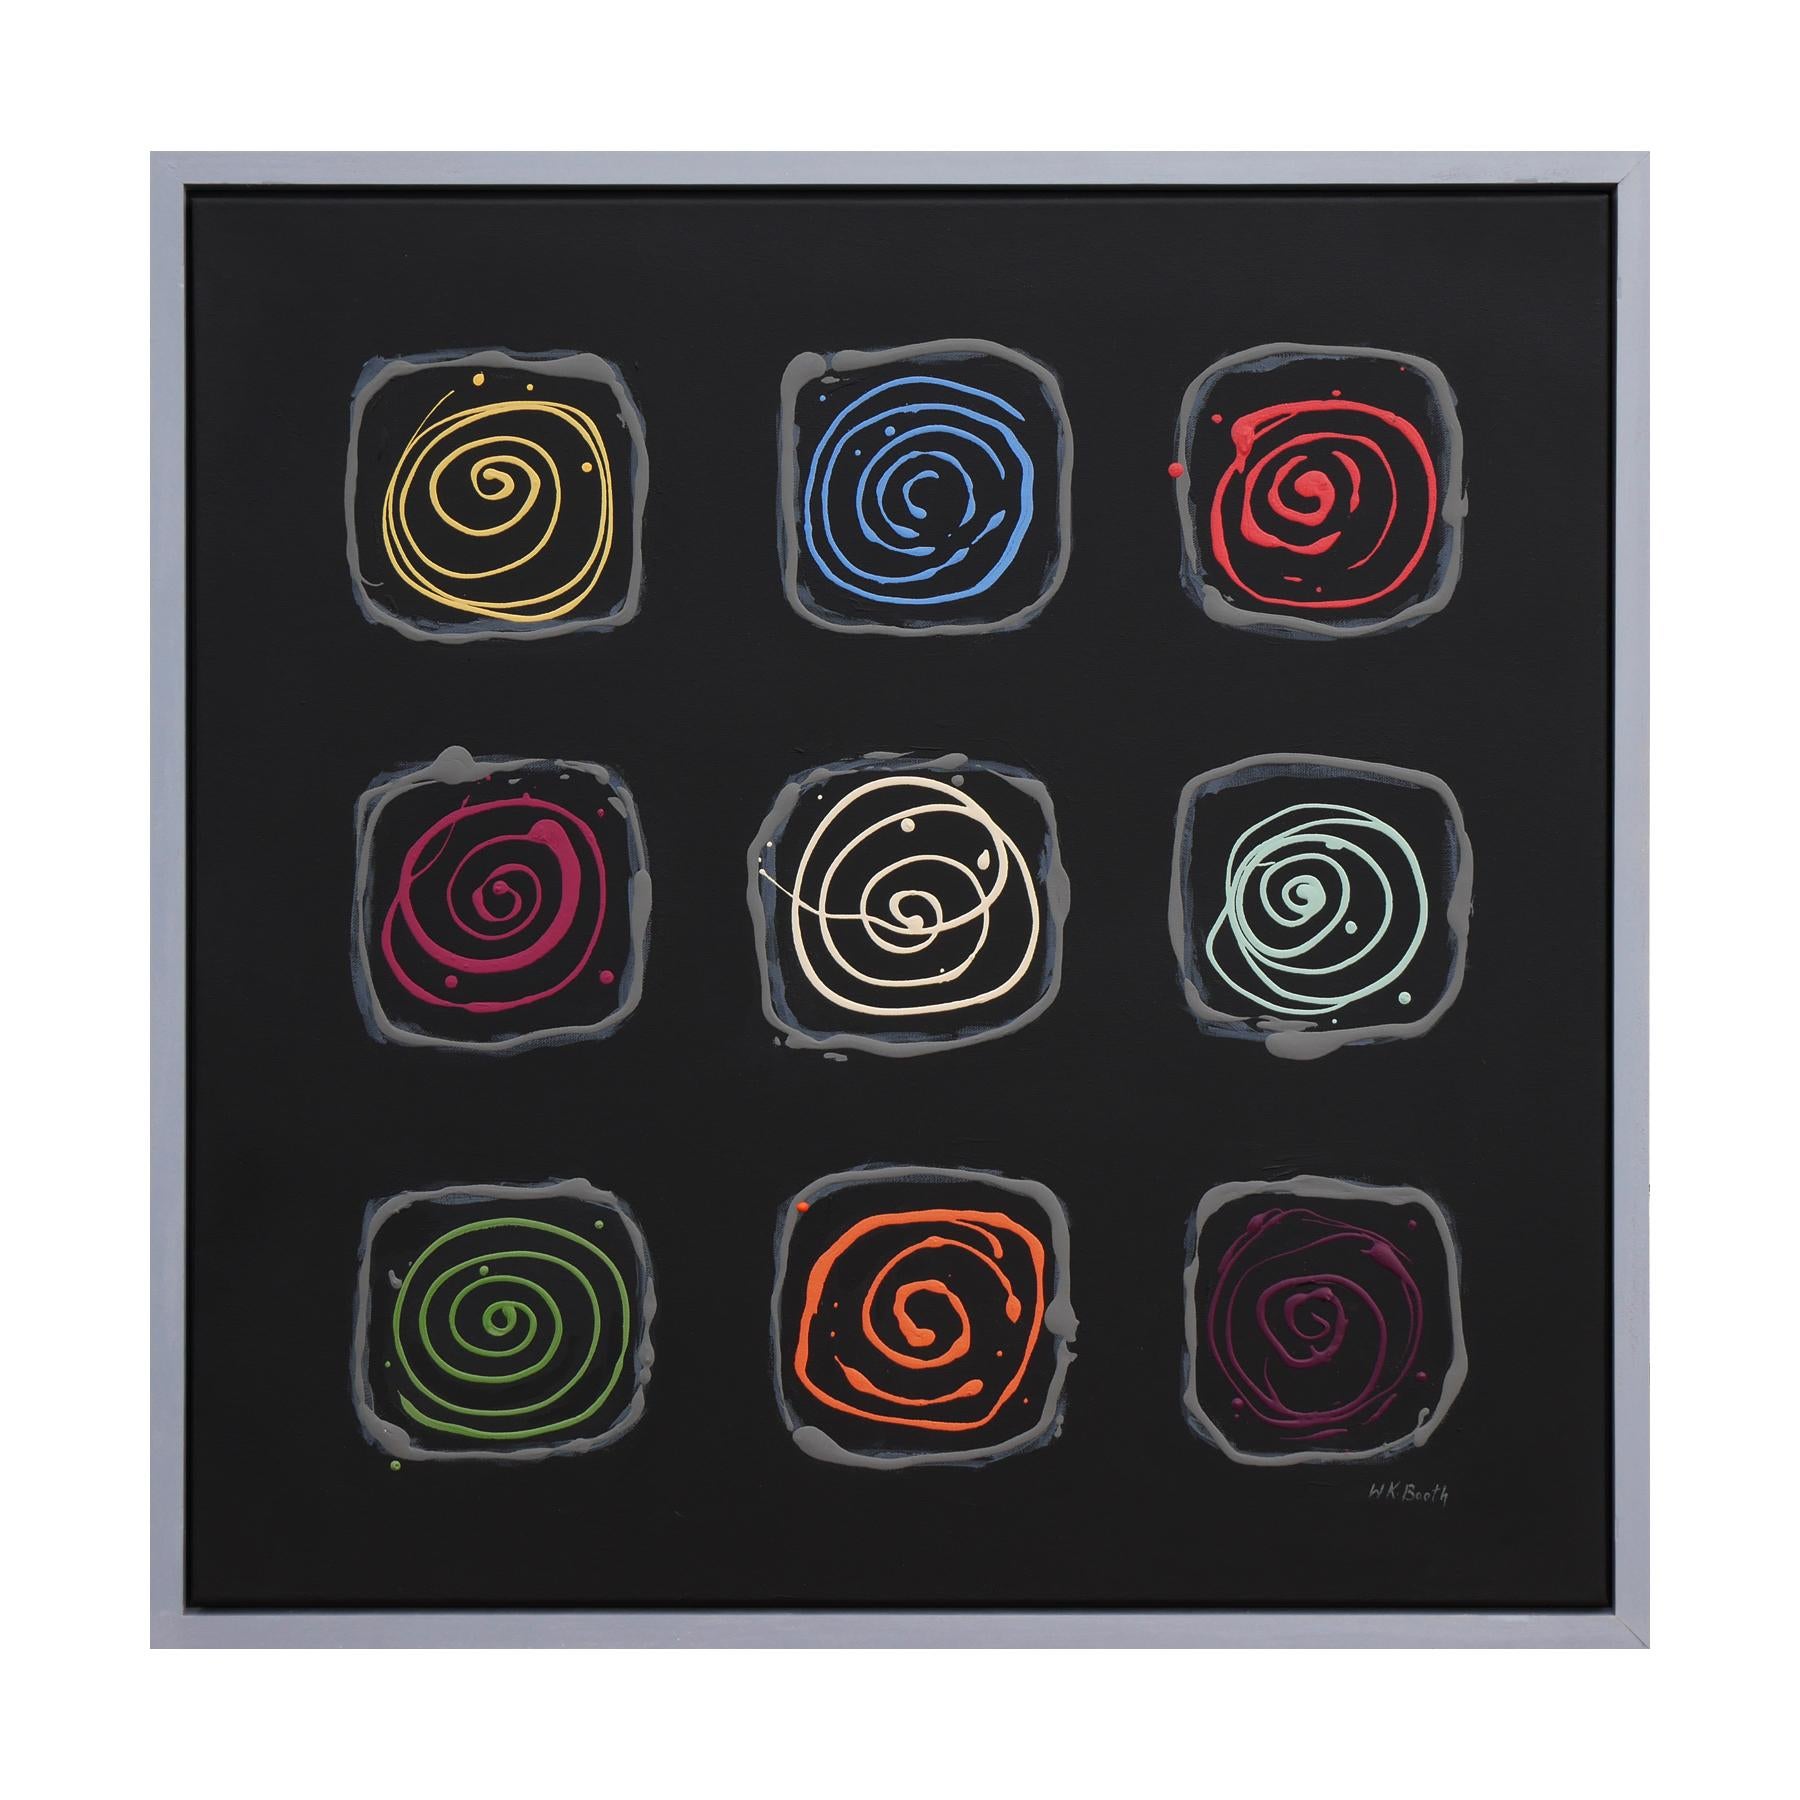 Colorful abstract contemporary painting by Houston, TX artist Winifred Booth. The painting depicts nine multicolored spirals in a grid against a plain black background. The piece is signed by the artist at the front bottom right corner. Framed in a